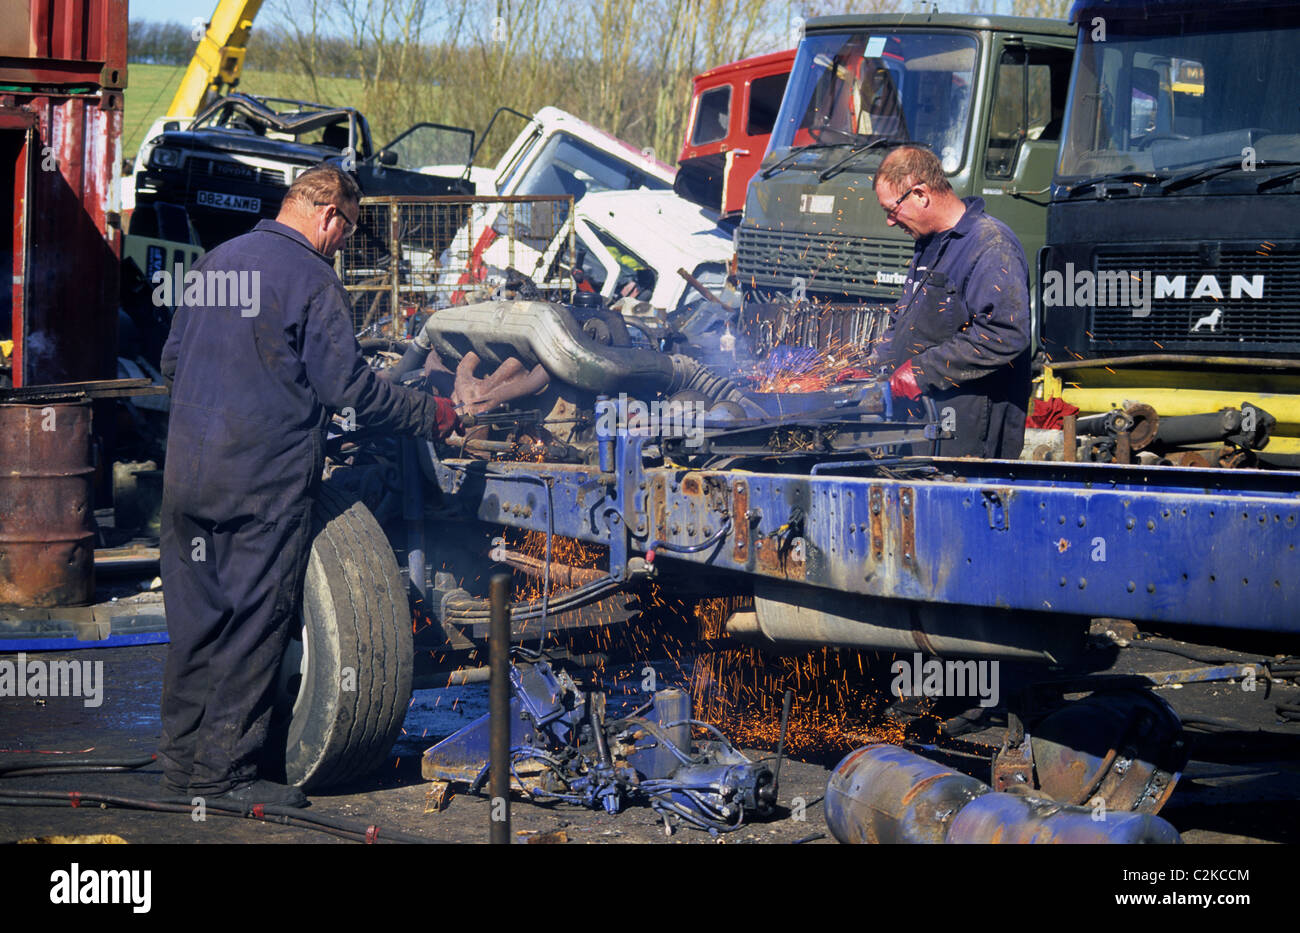 workmen using cutting torches to dismantle lorry in scrapyard uk Stock Photo